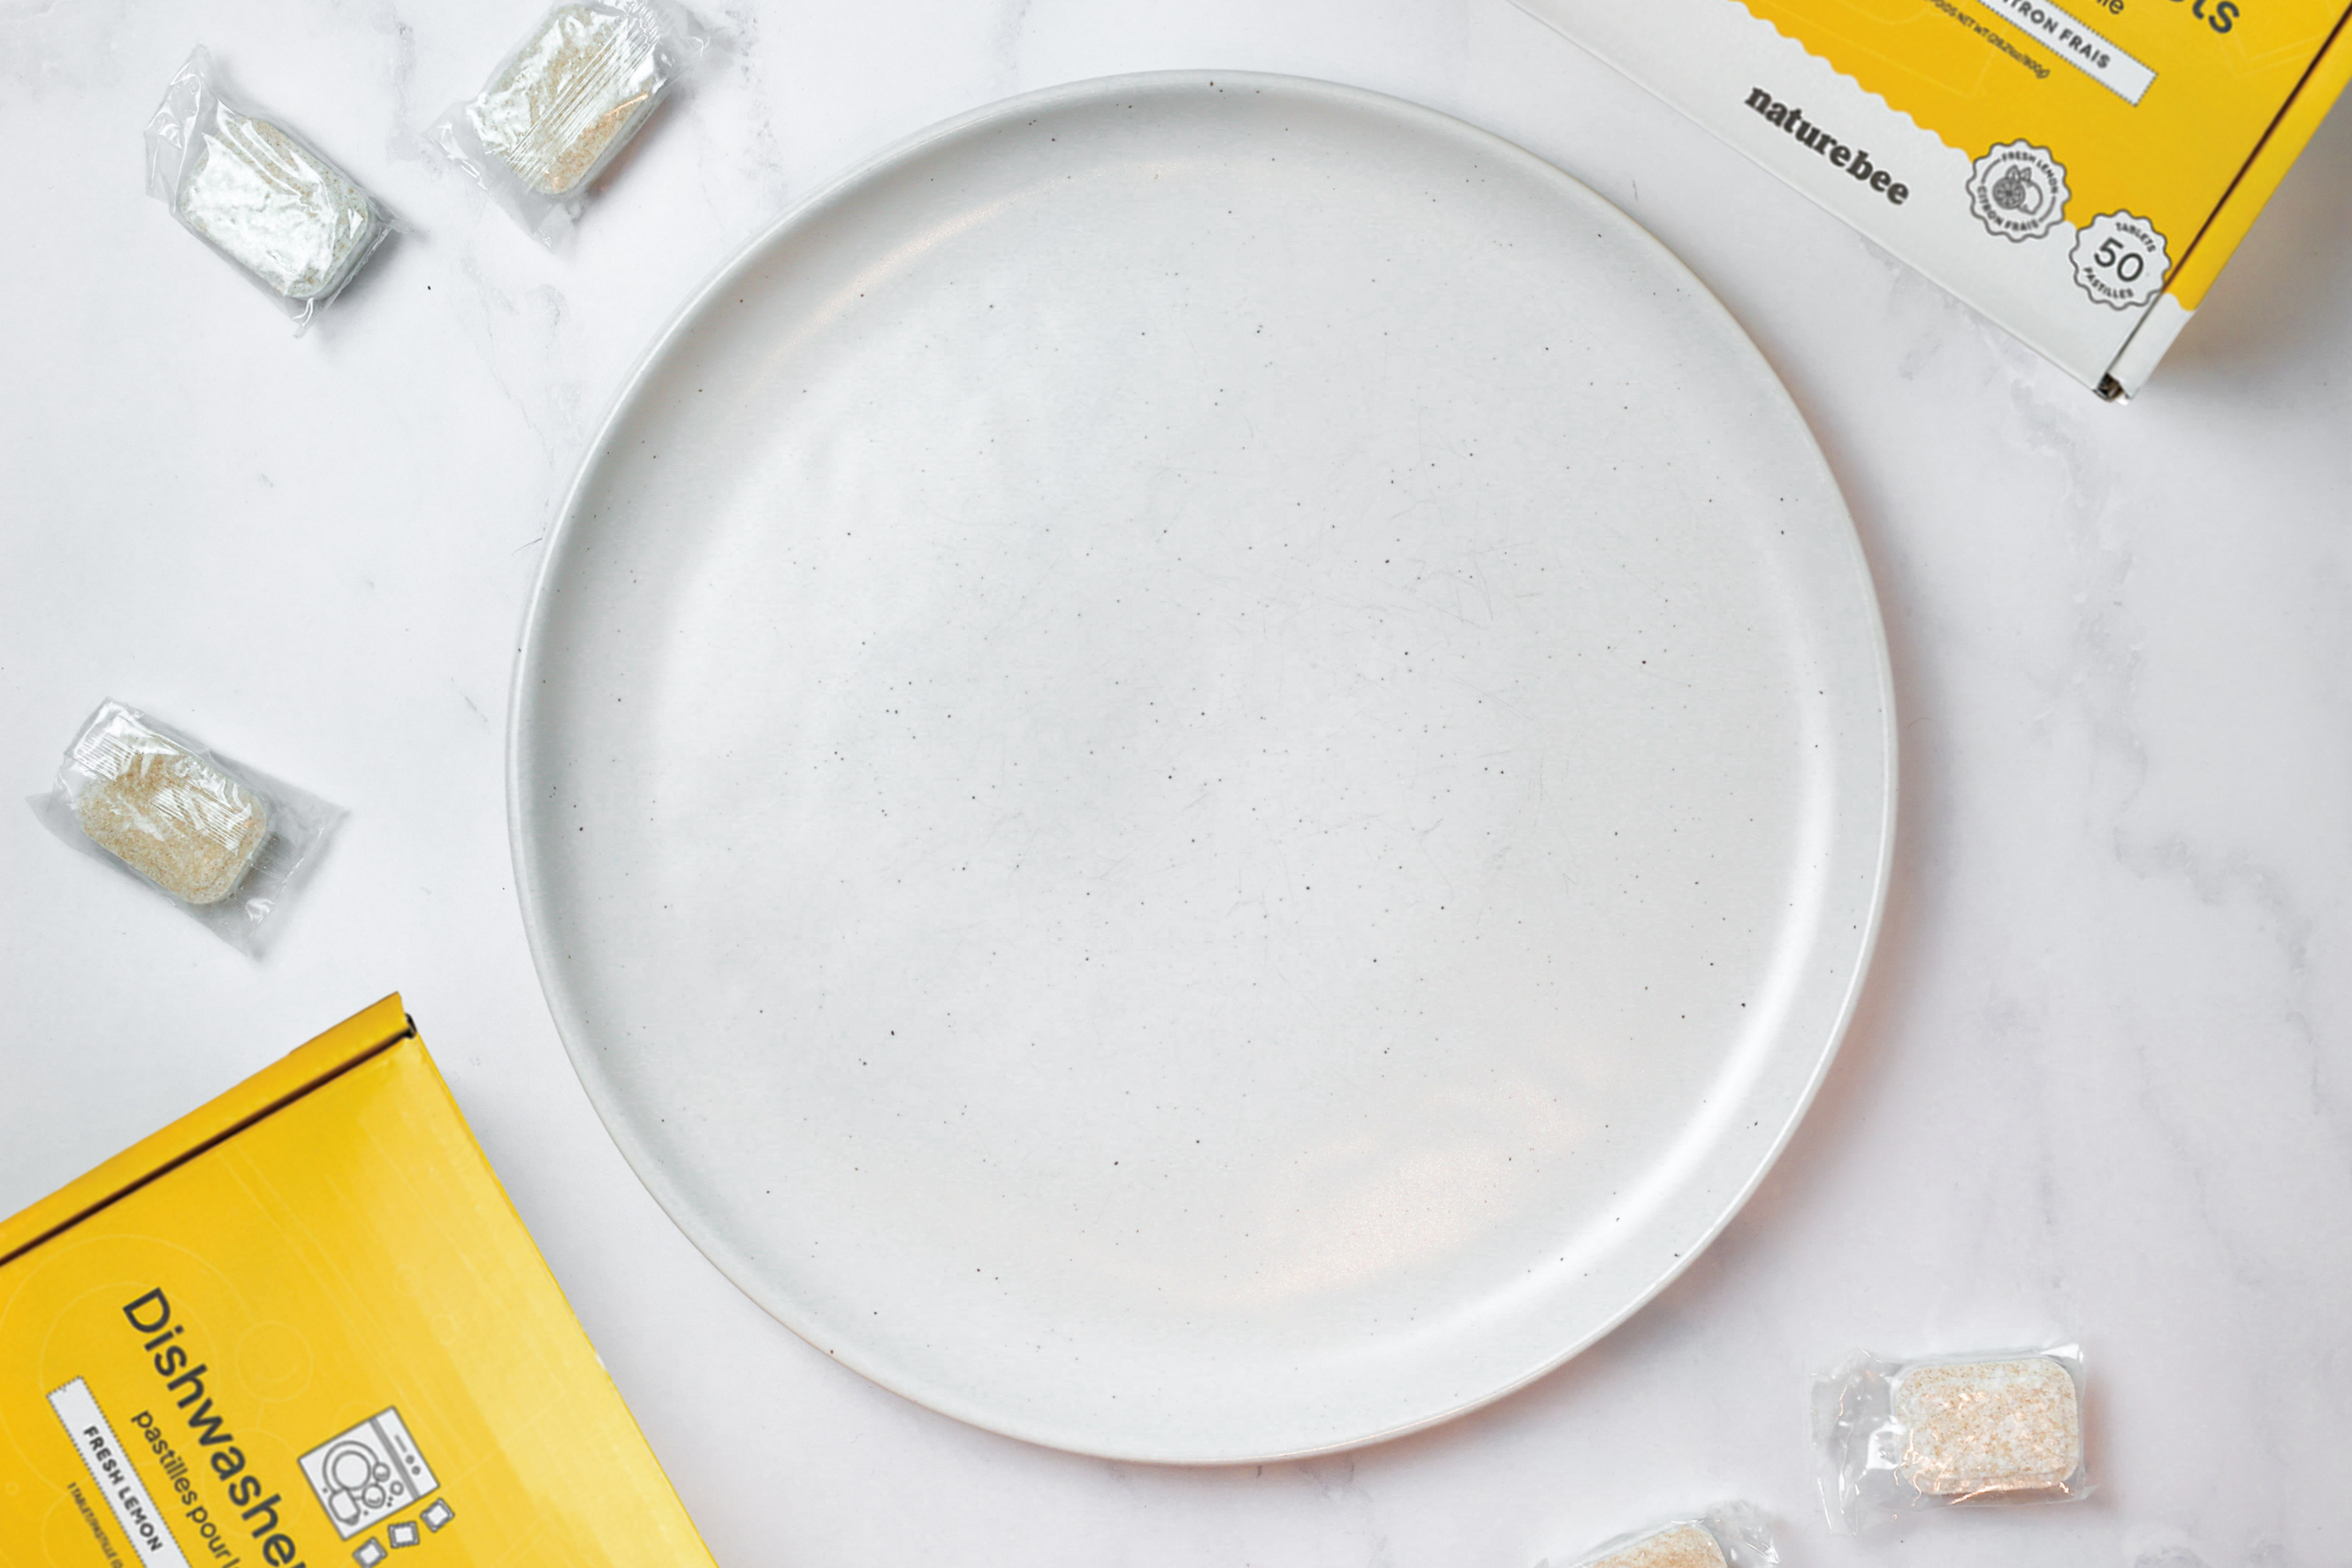 Comparison image two: after using Nature Bee dishwasher tablets, the plate is stain free, sparkling, and bright white.